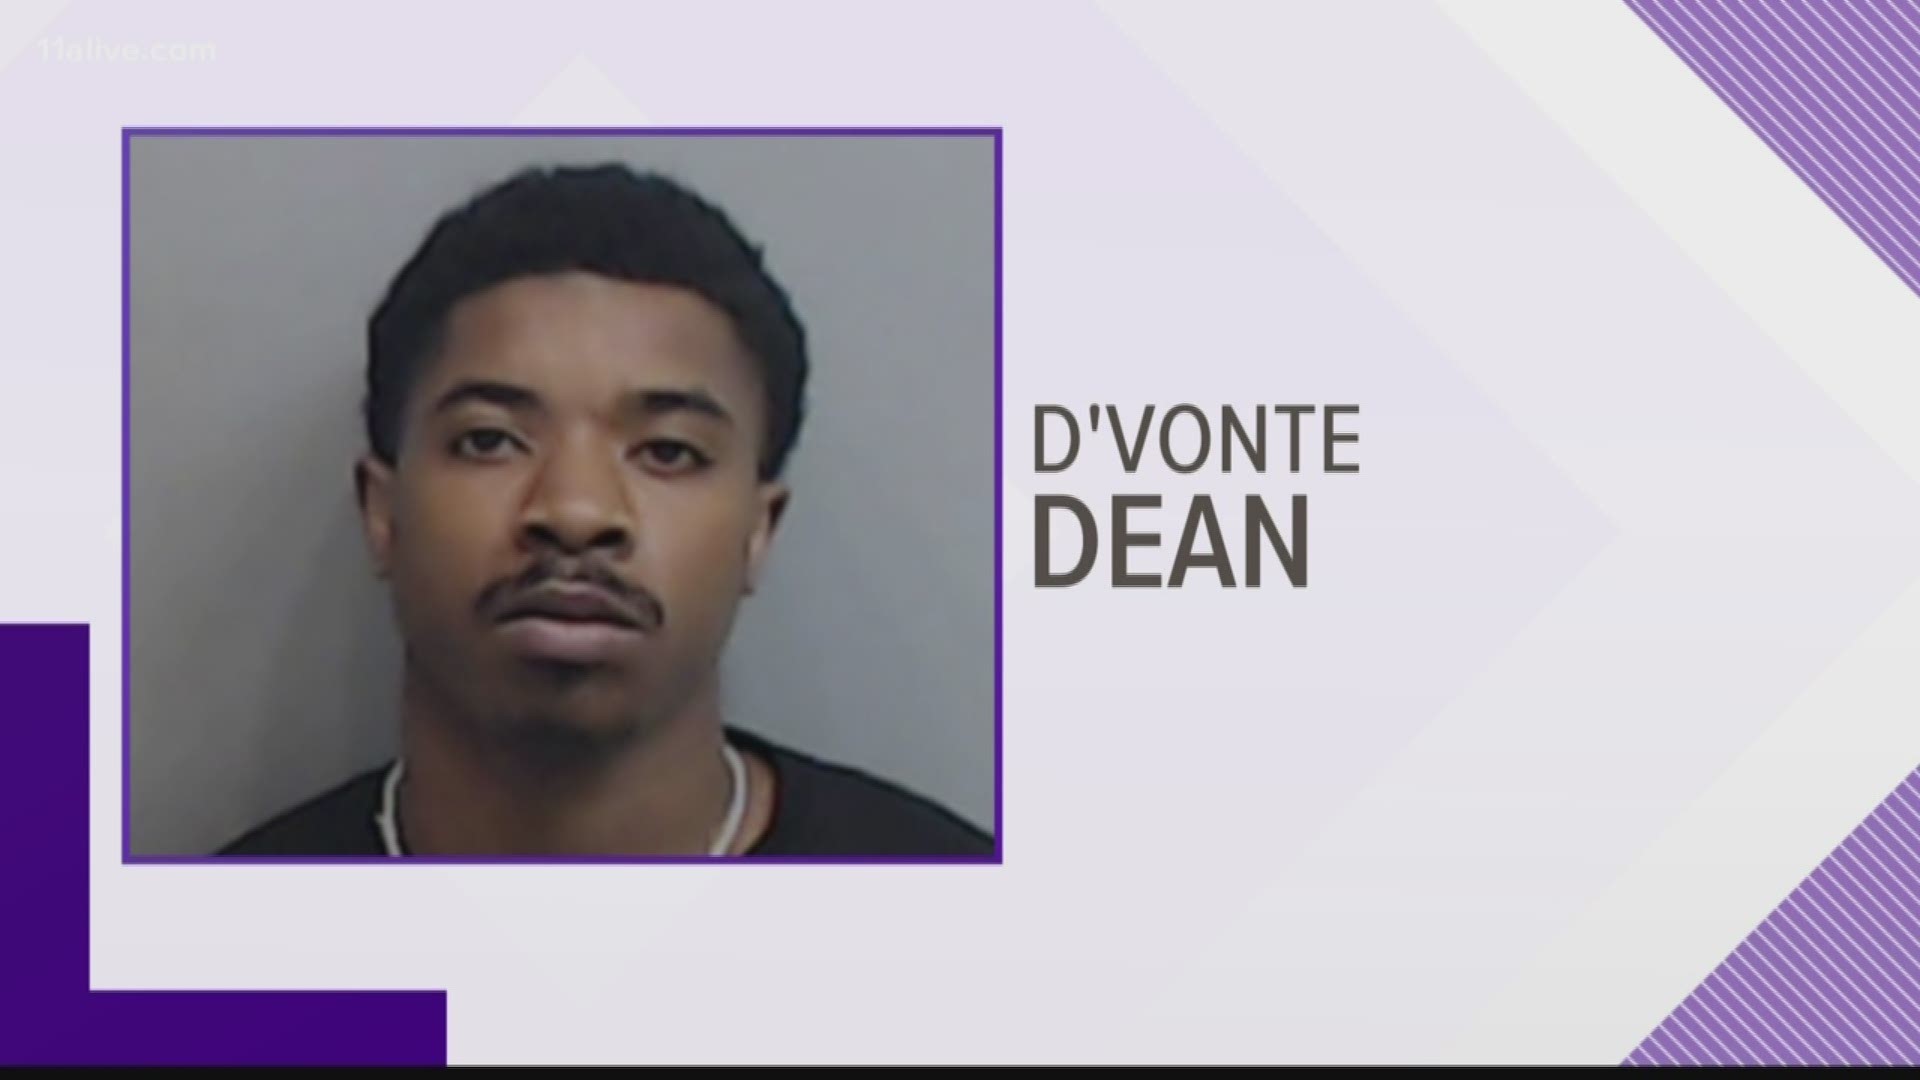 One of two men involved in a shooting and robbery in the parking deck at Lenox Square mall in December has been arrested.